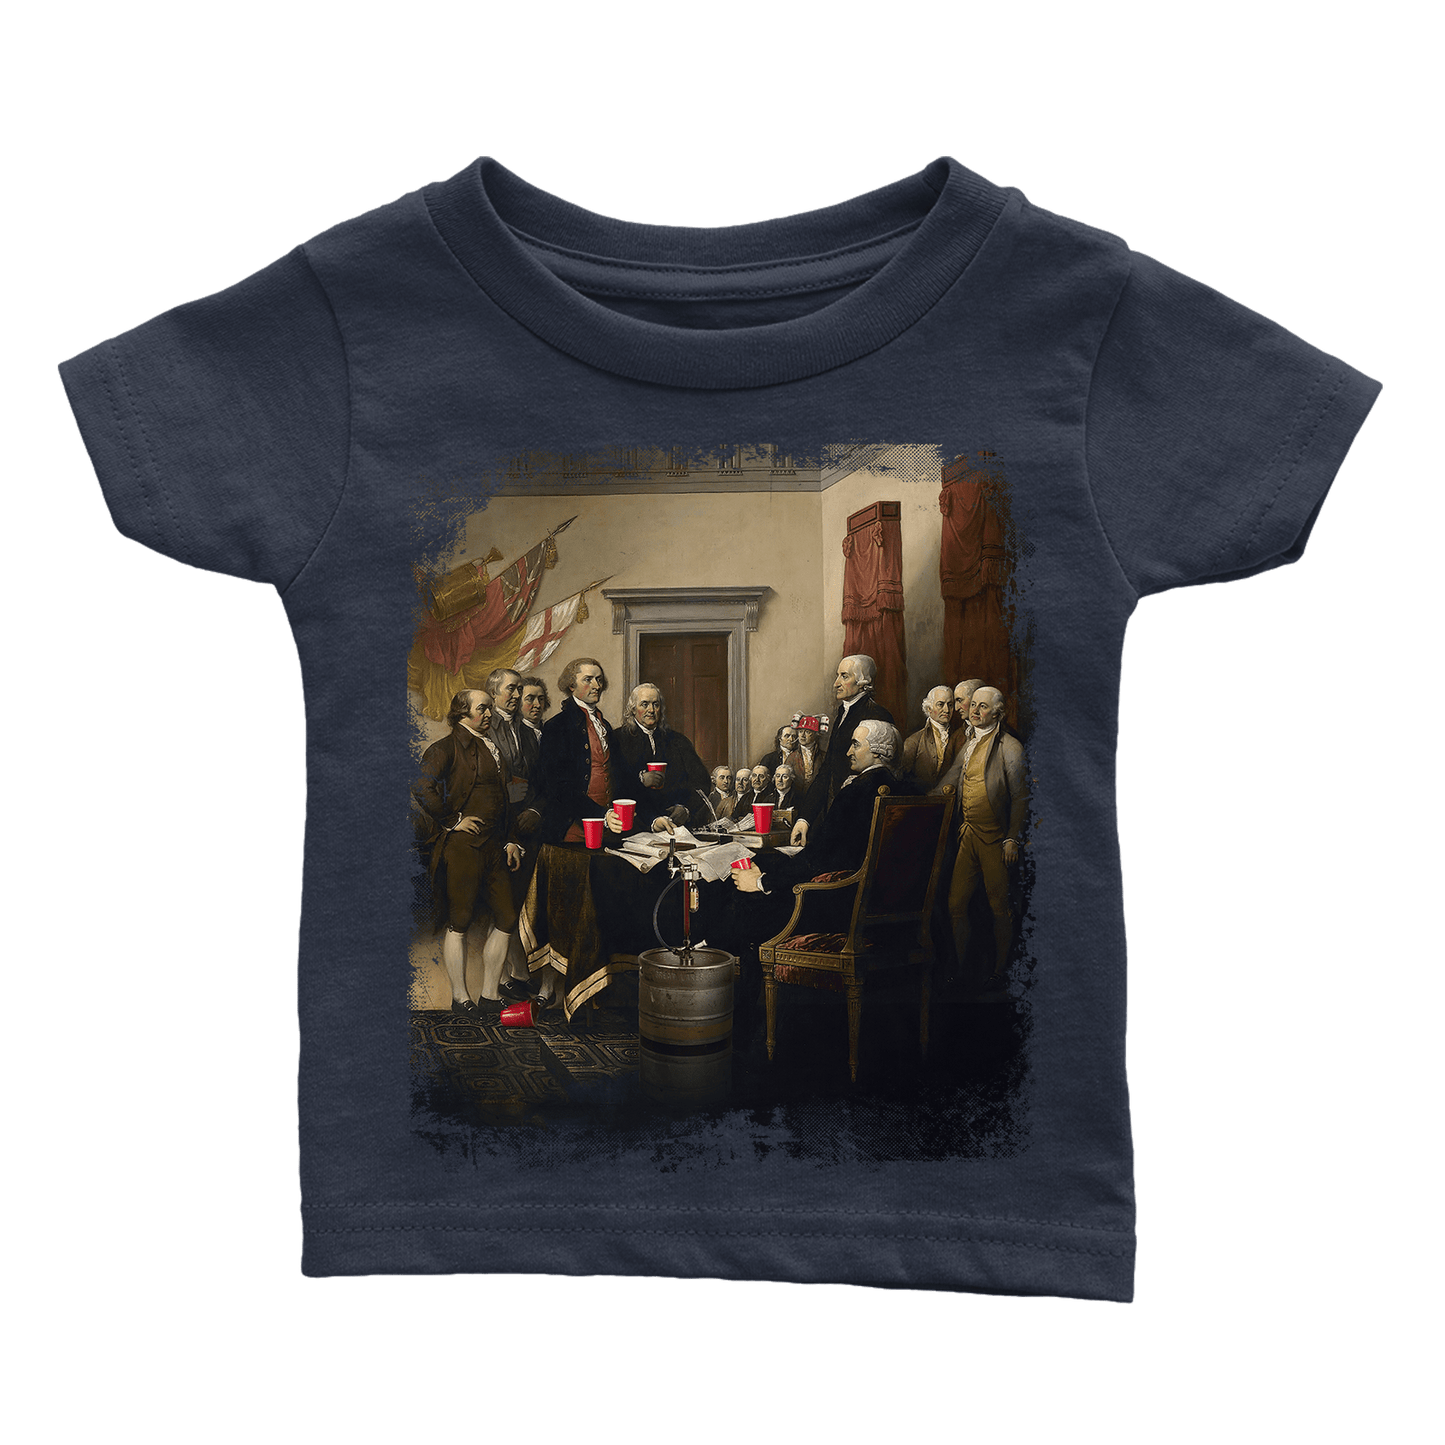 Apparel Premium Infant Shirt / Navy / 6 Months Party Like Our Forefathers - Rugrats